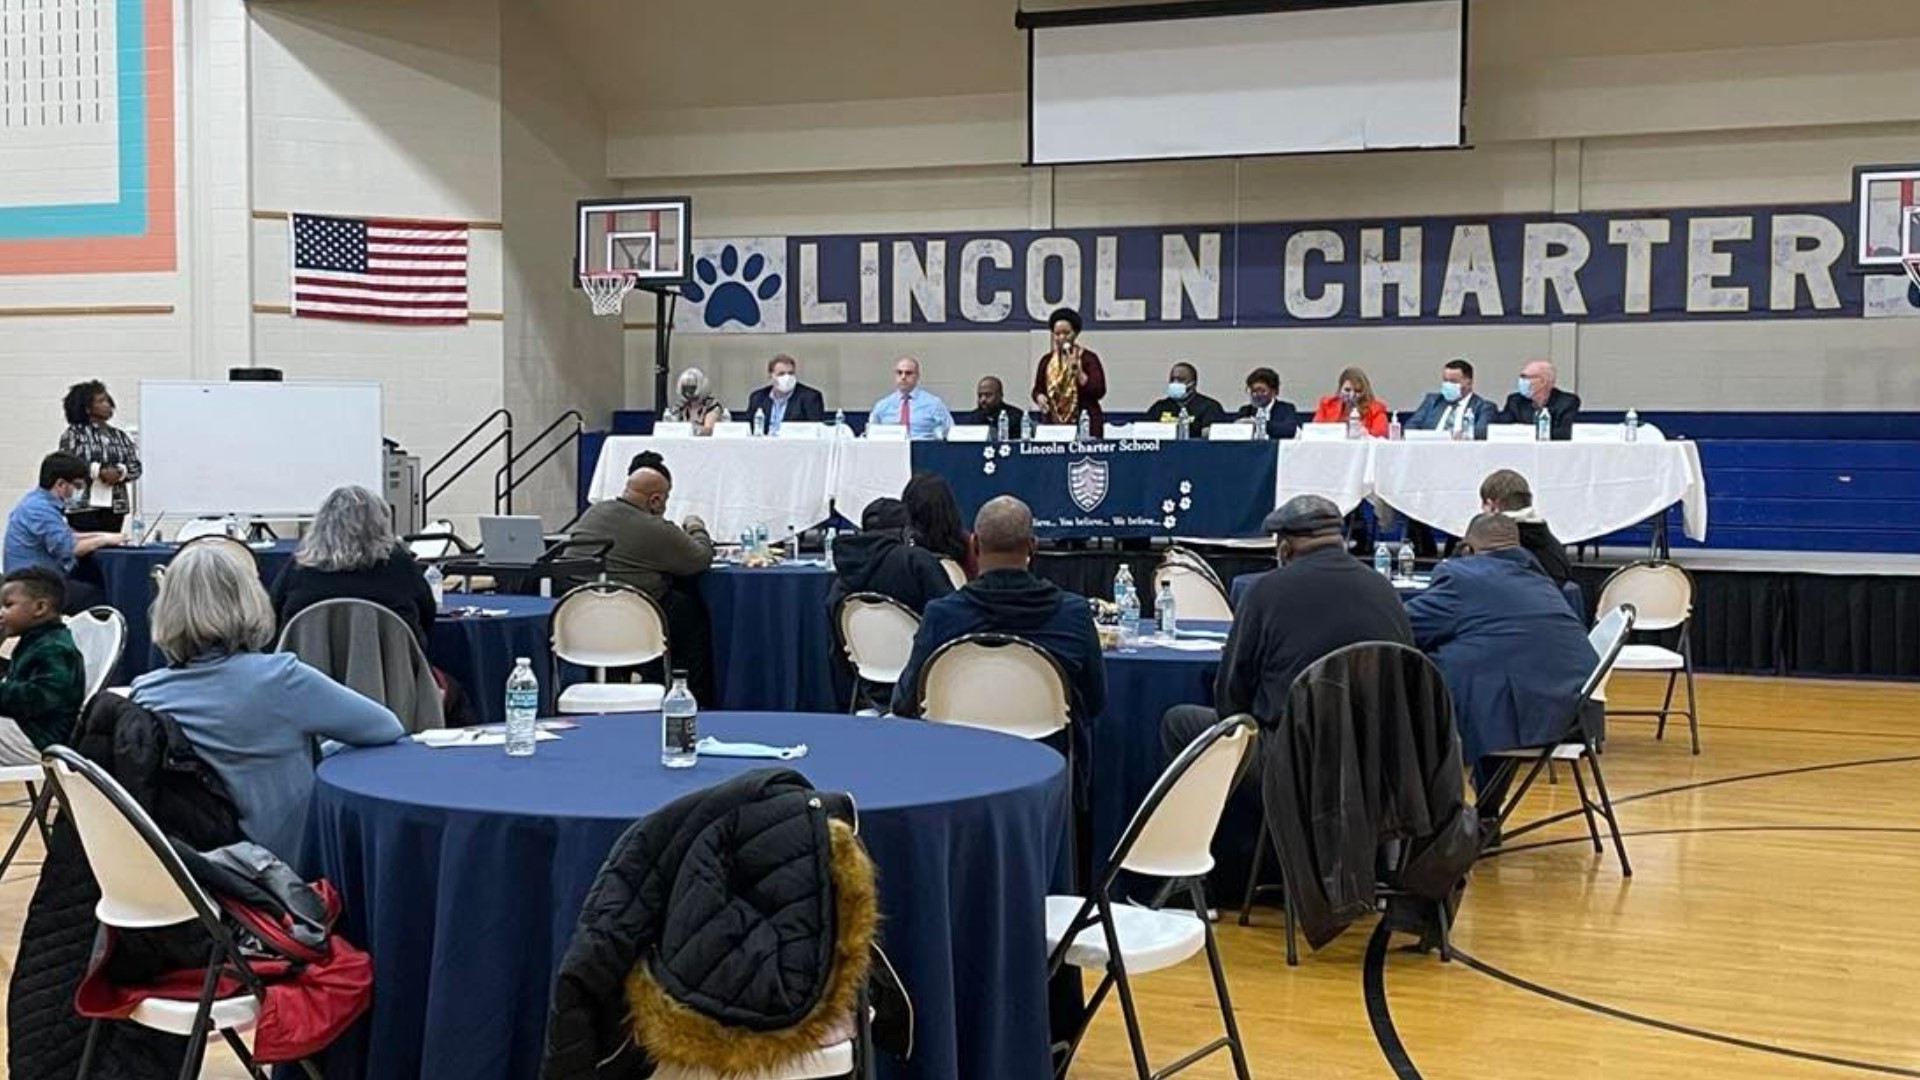 A public discussion on prevention of gun violence brought York leaders and community members to gather at Lincoln Charter School on Monday night.